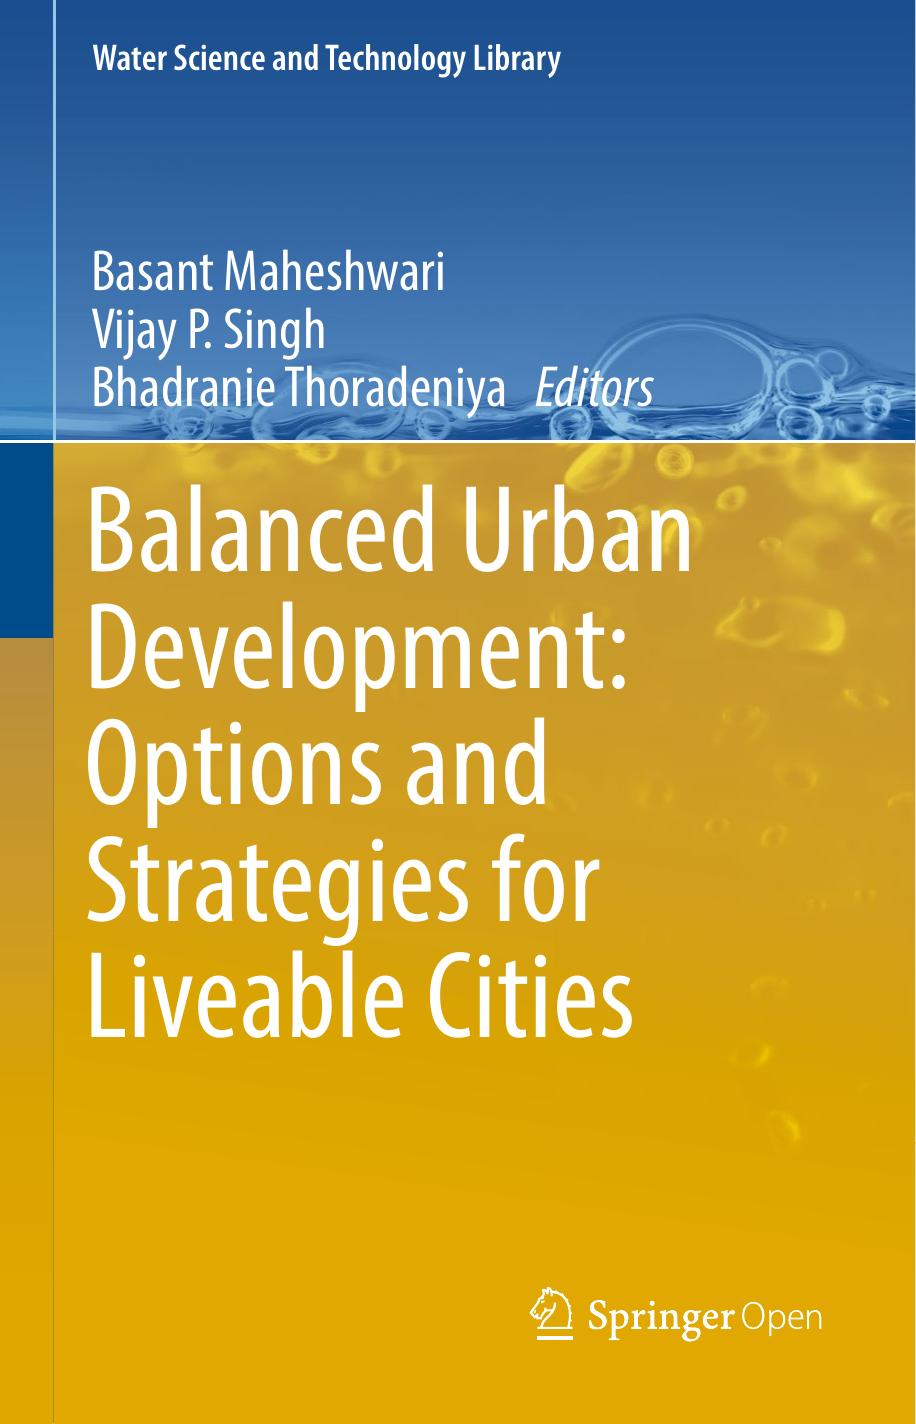 Balanced Urban Development Options and Strategies for Liveable Cities 2016